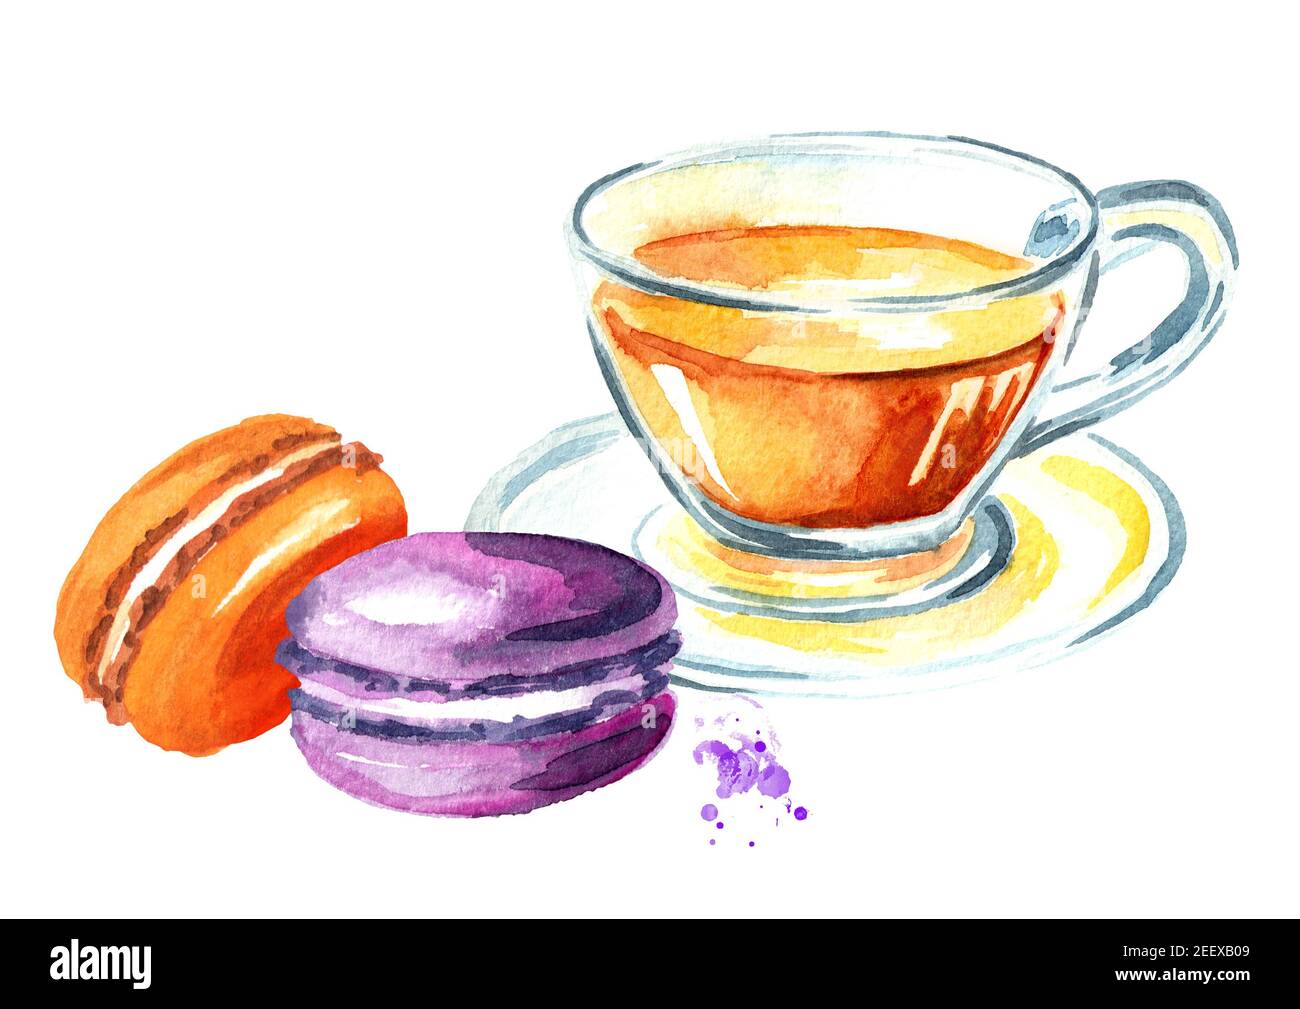 Traditional french Cake macaron or macaroon, colorful almond cookie, with tea. Watercolor hand drawn illustration, isolated on white background Stock Photo